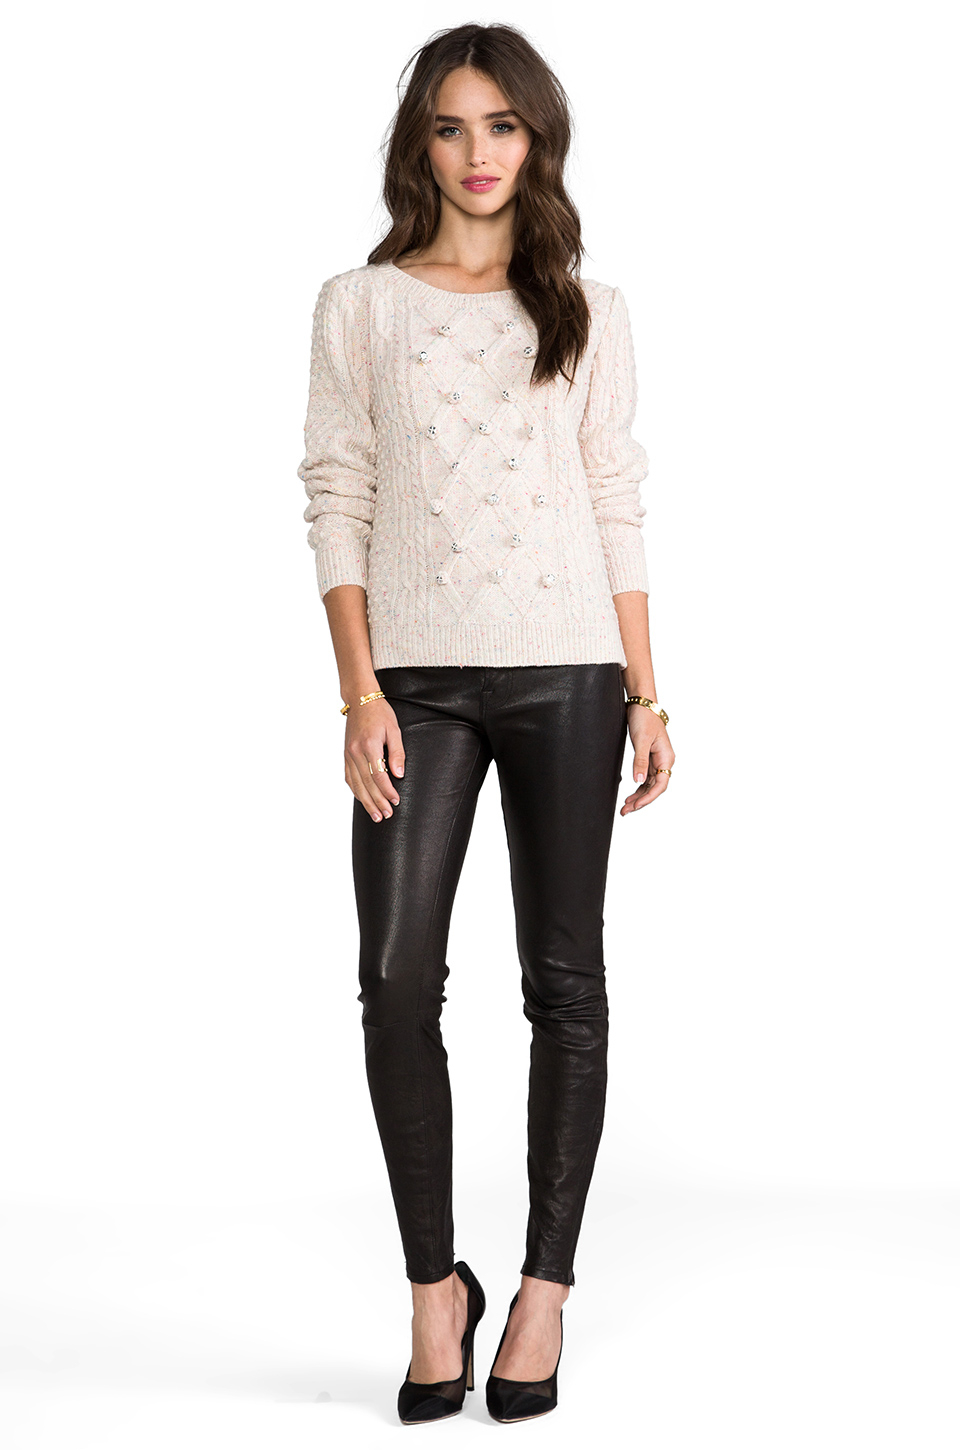 Lyst - Milly Sparkle Sweater in Cream in White